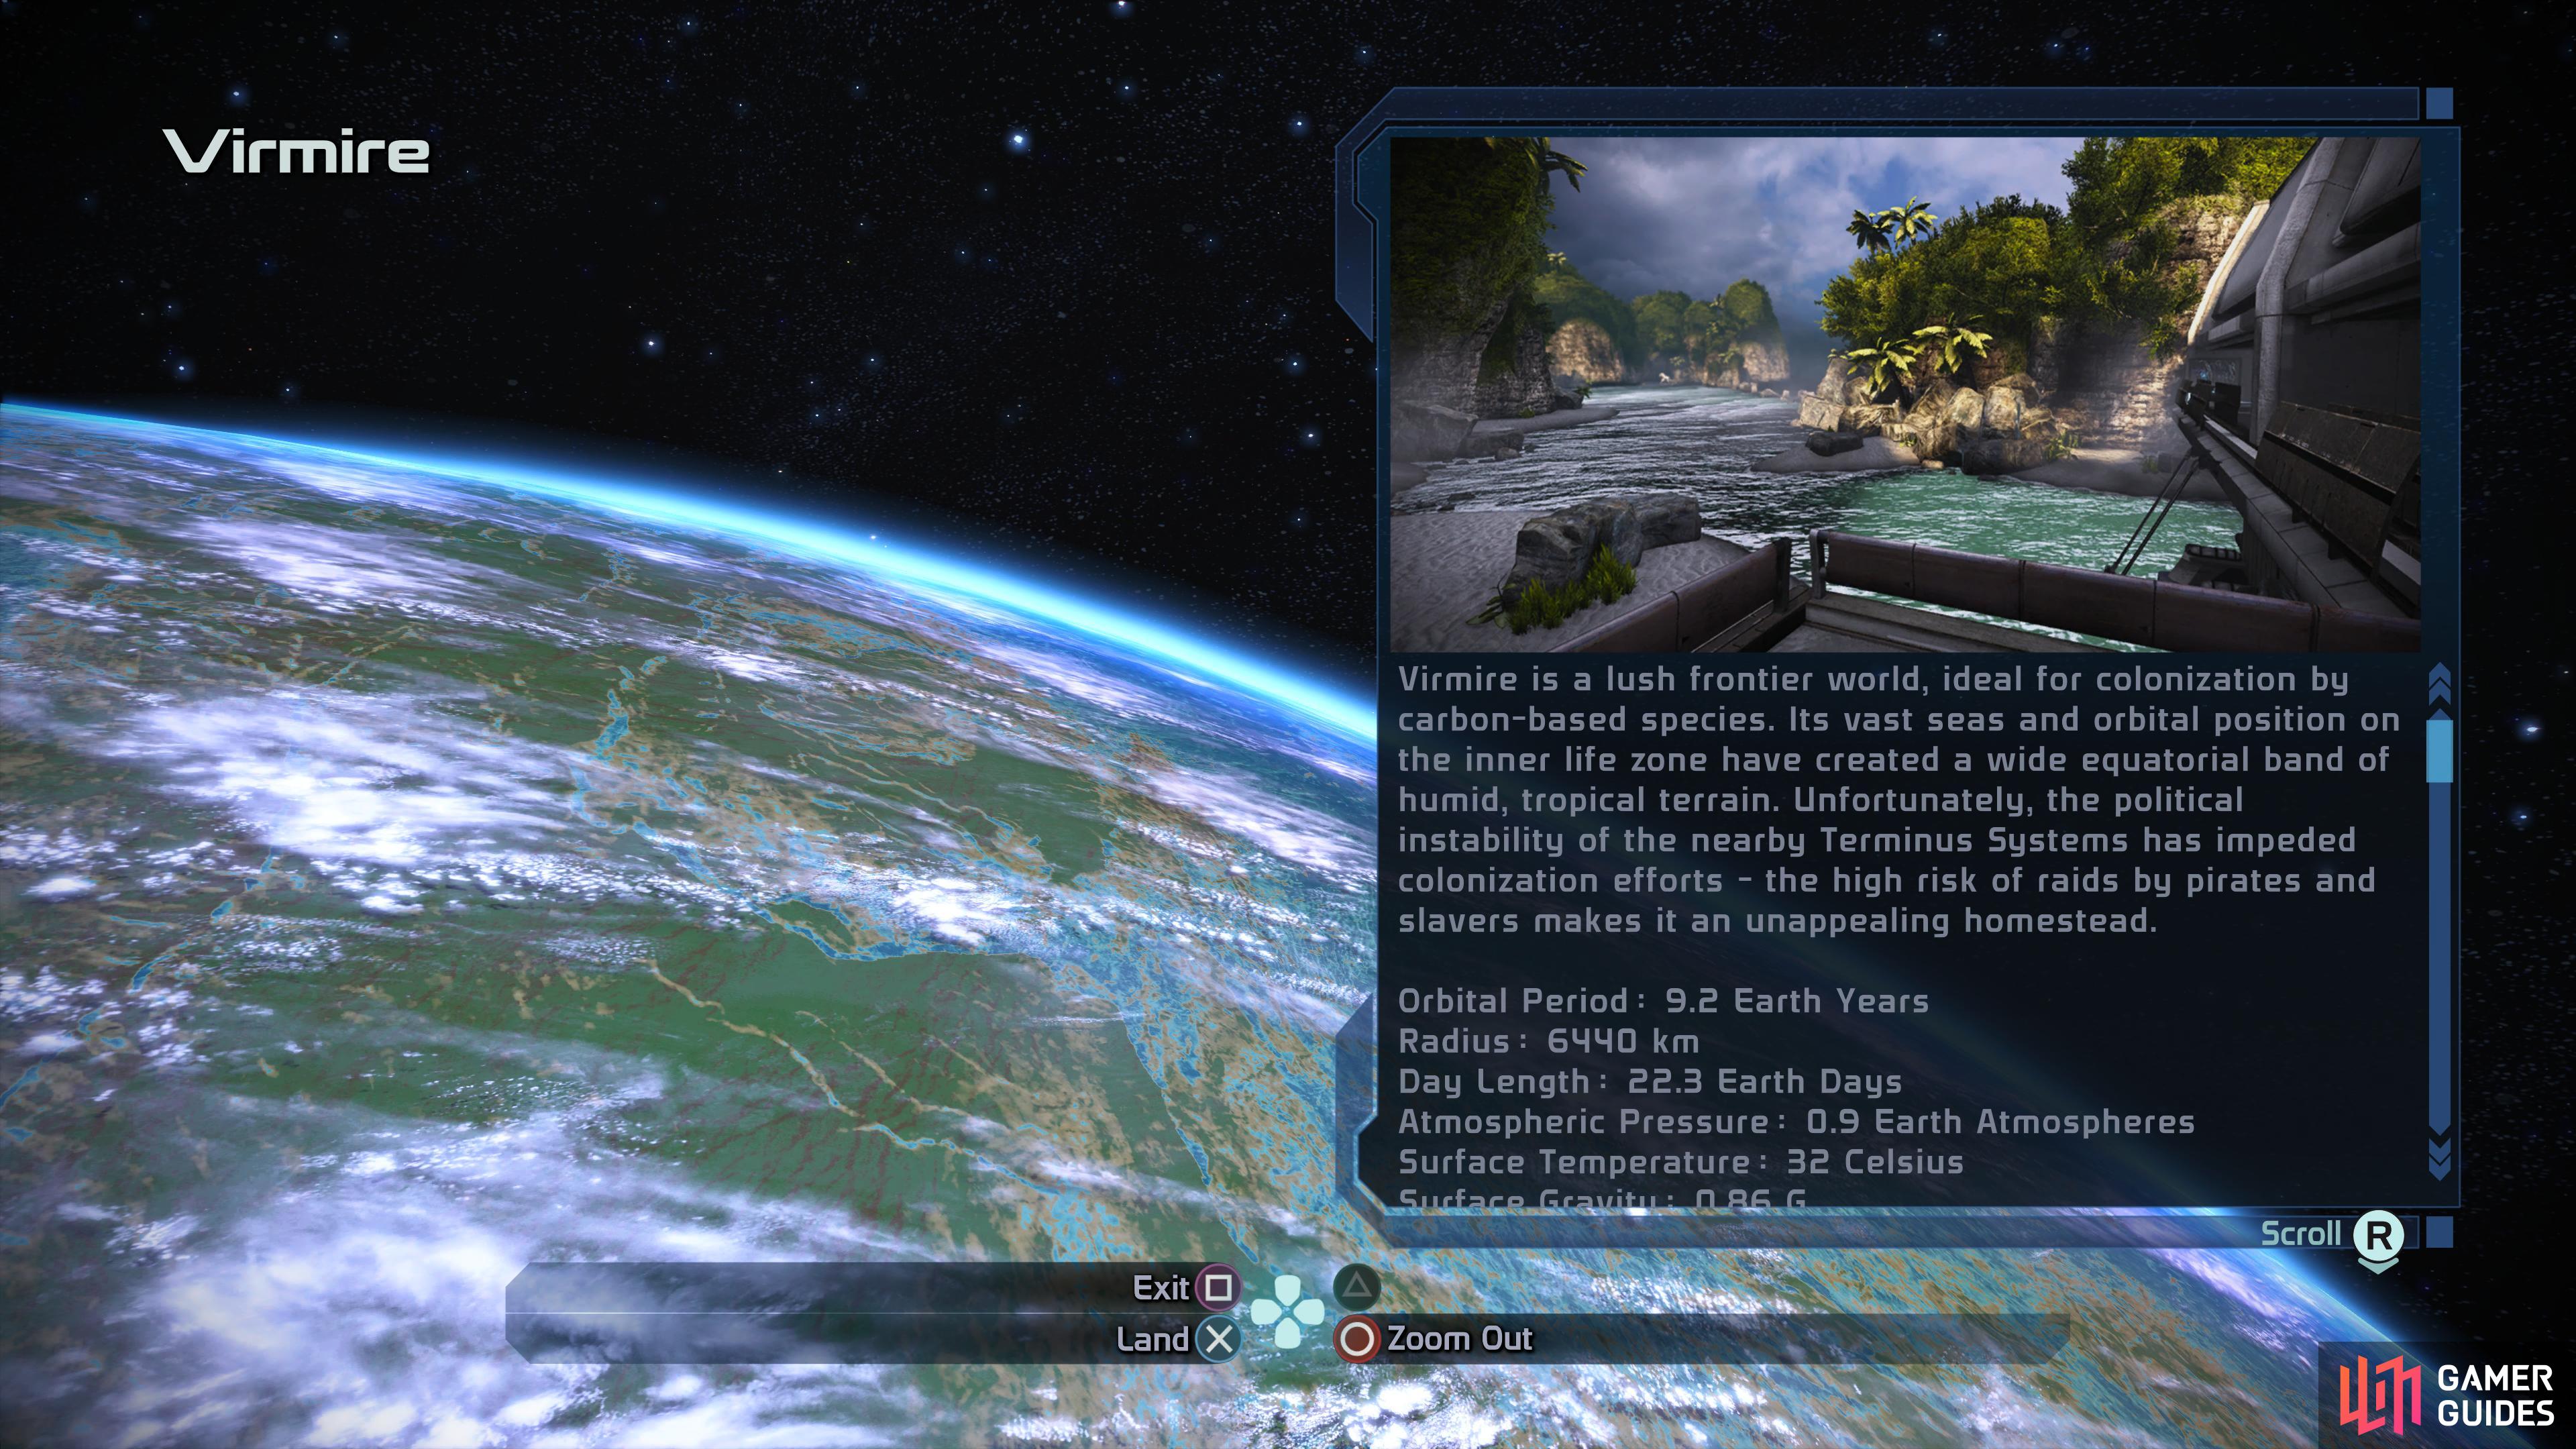 After completing two of the first three core missions, you'll be given the mission on Virmire.